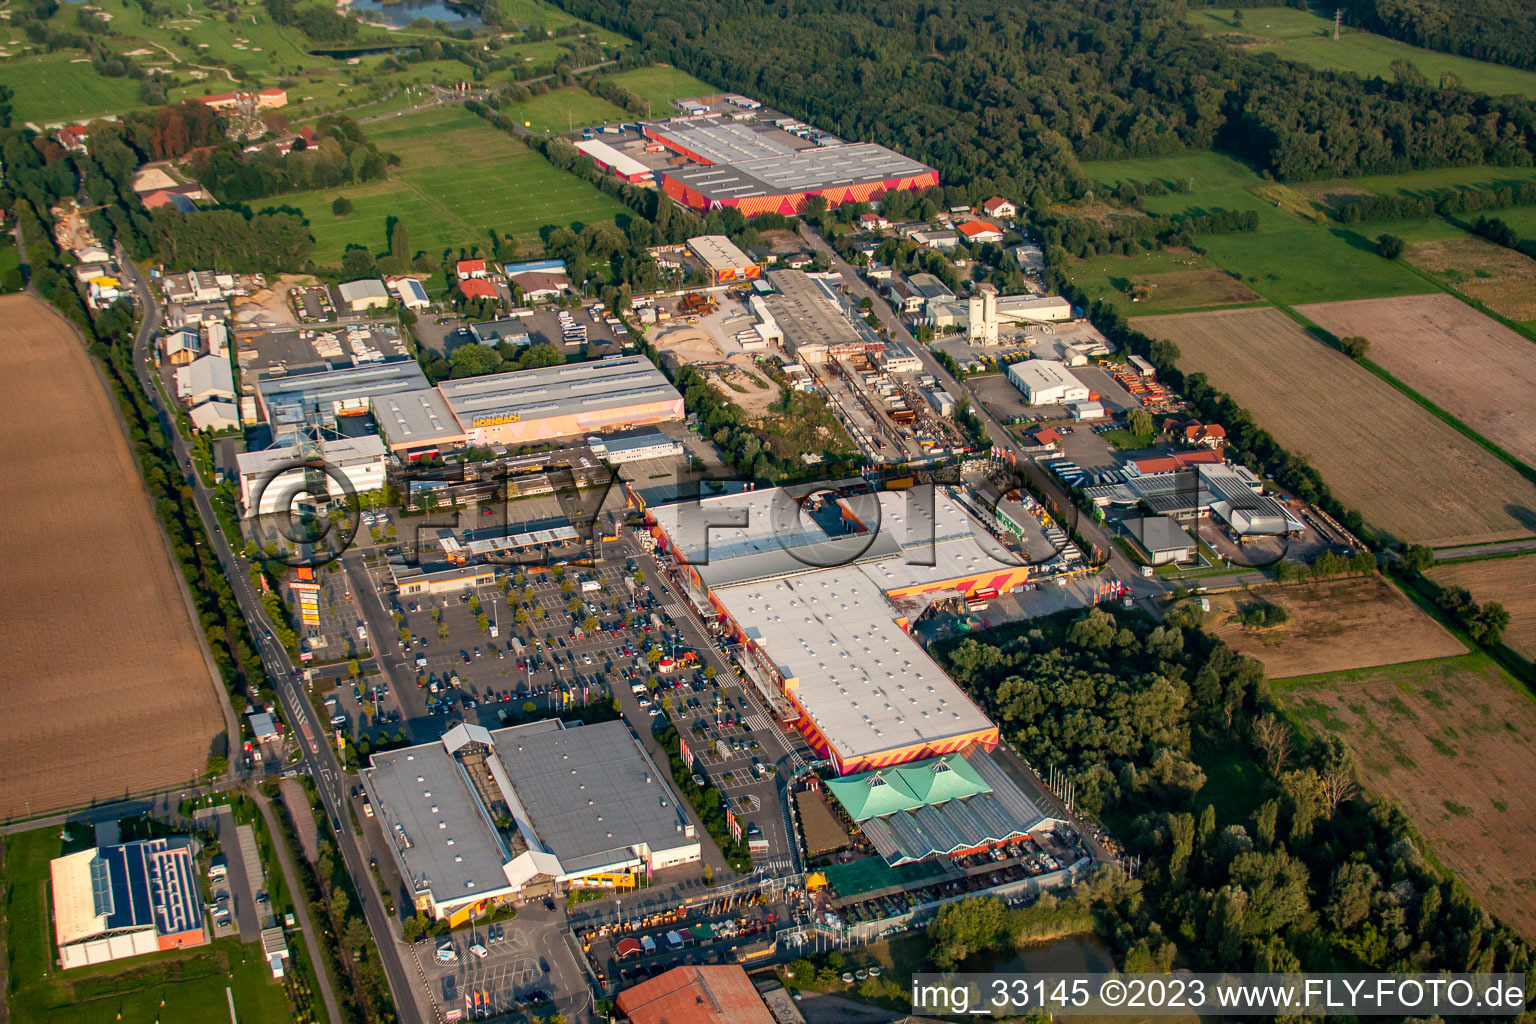 Aerial view of Hornbach construction center in Bornheim in the state Rhineland-Palatinate, Germany